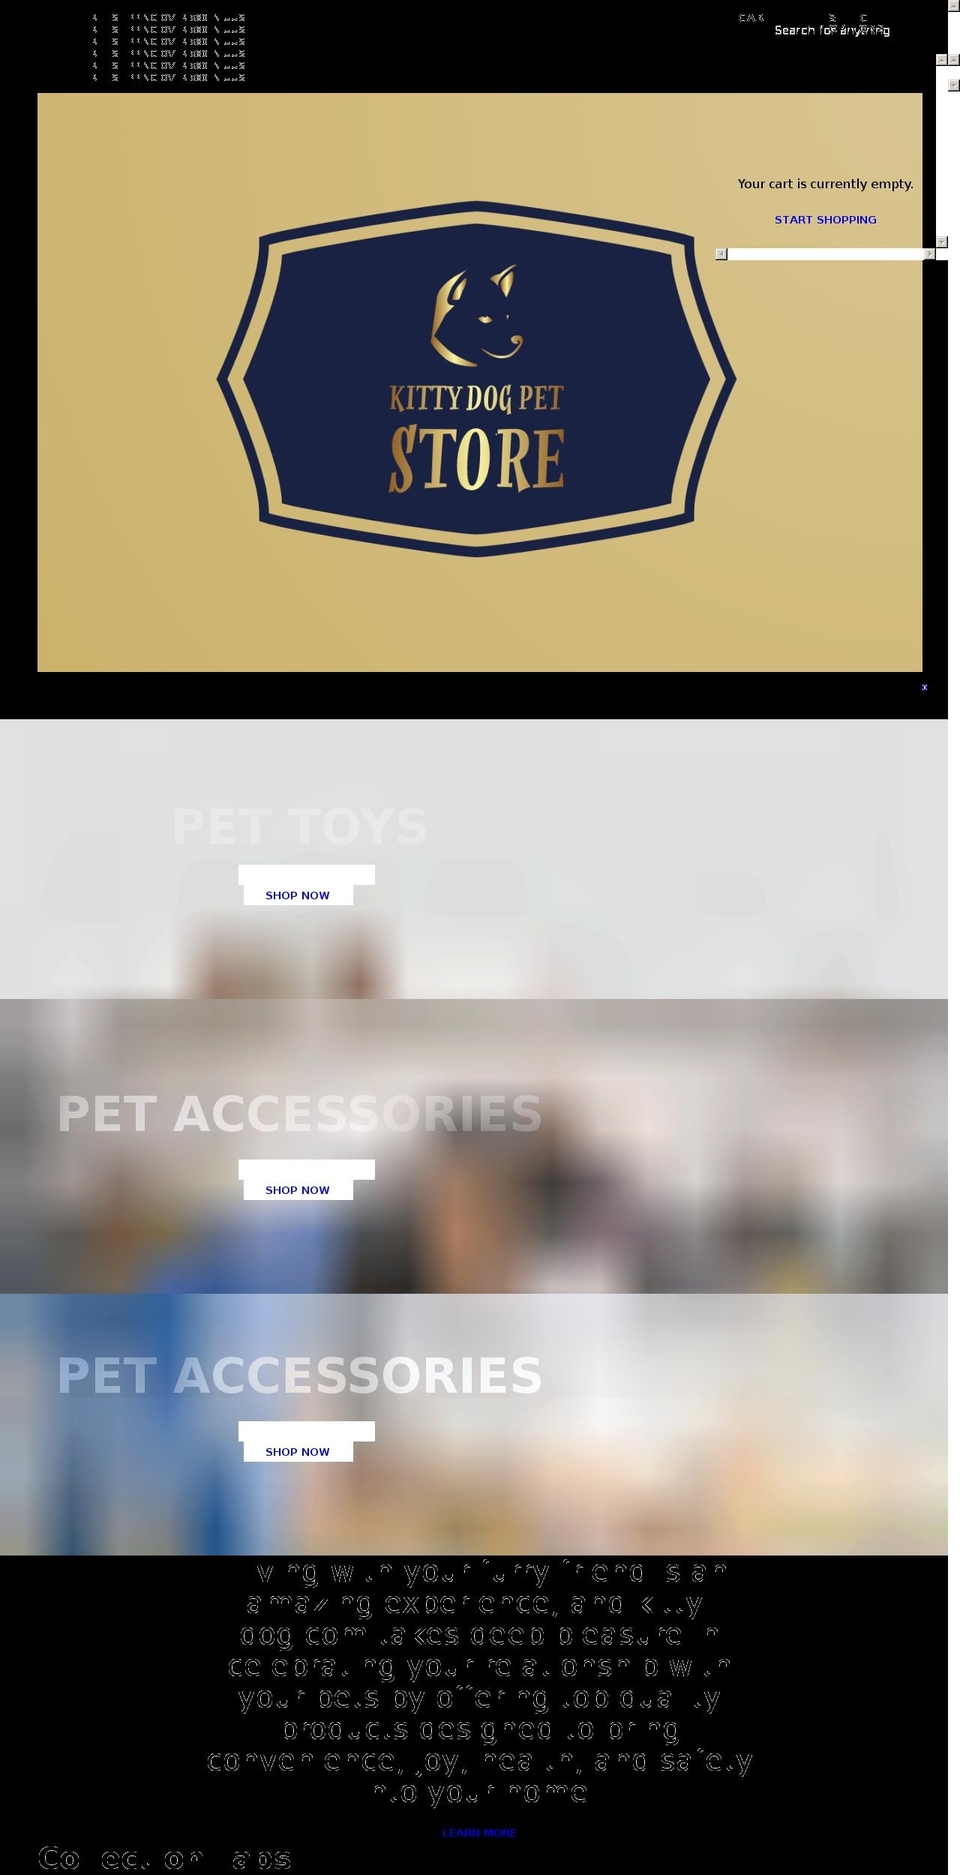 Reformation Shopify theme site example kitty-dog.com